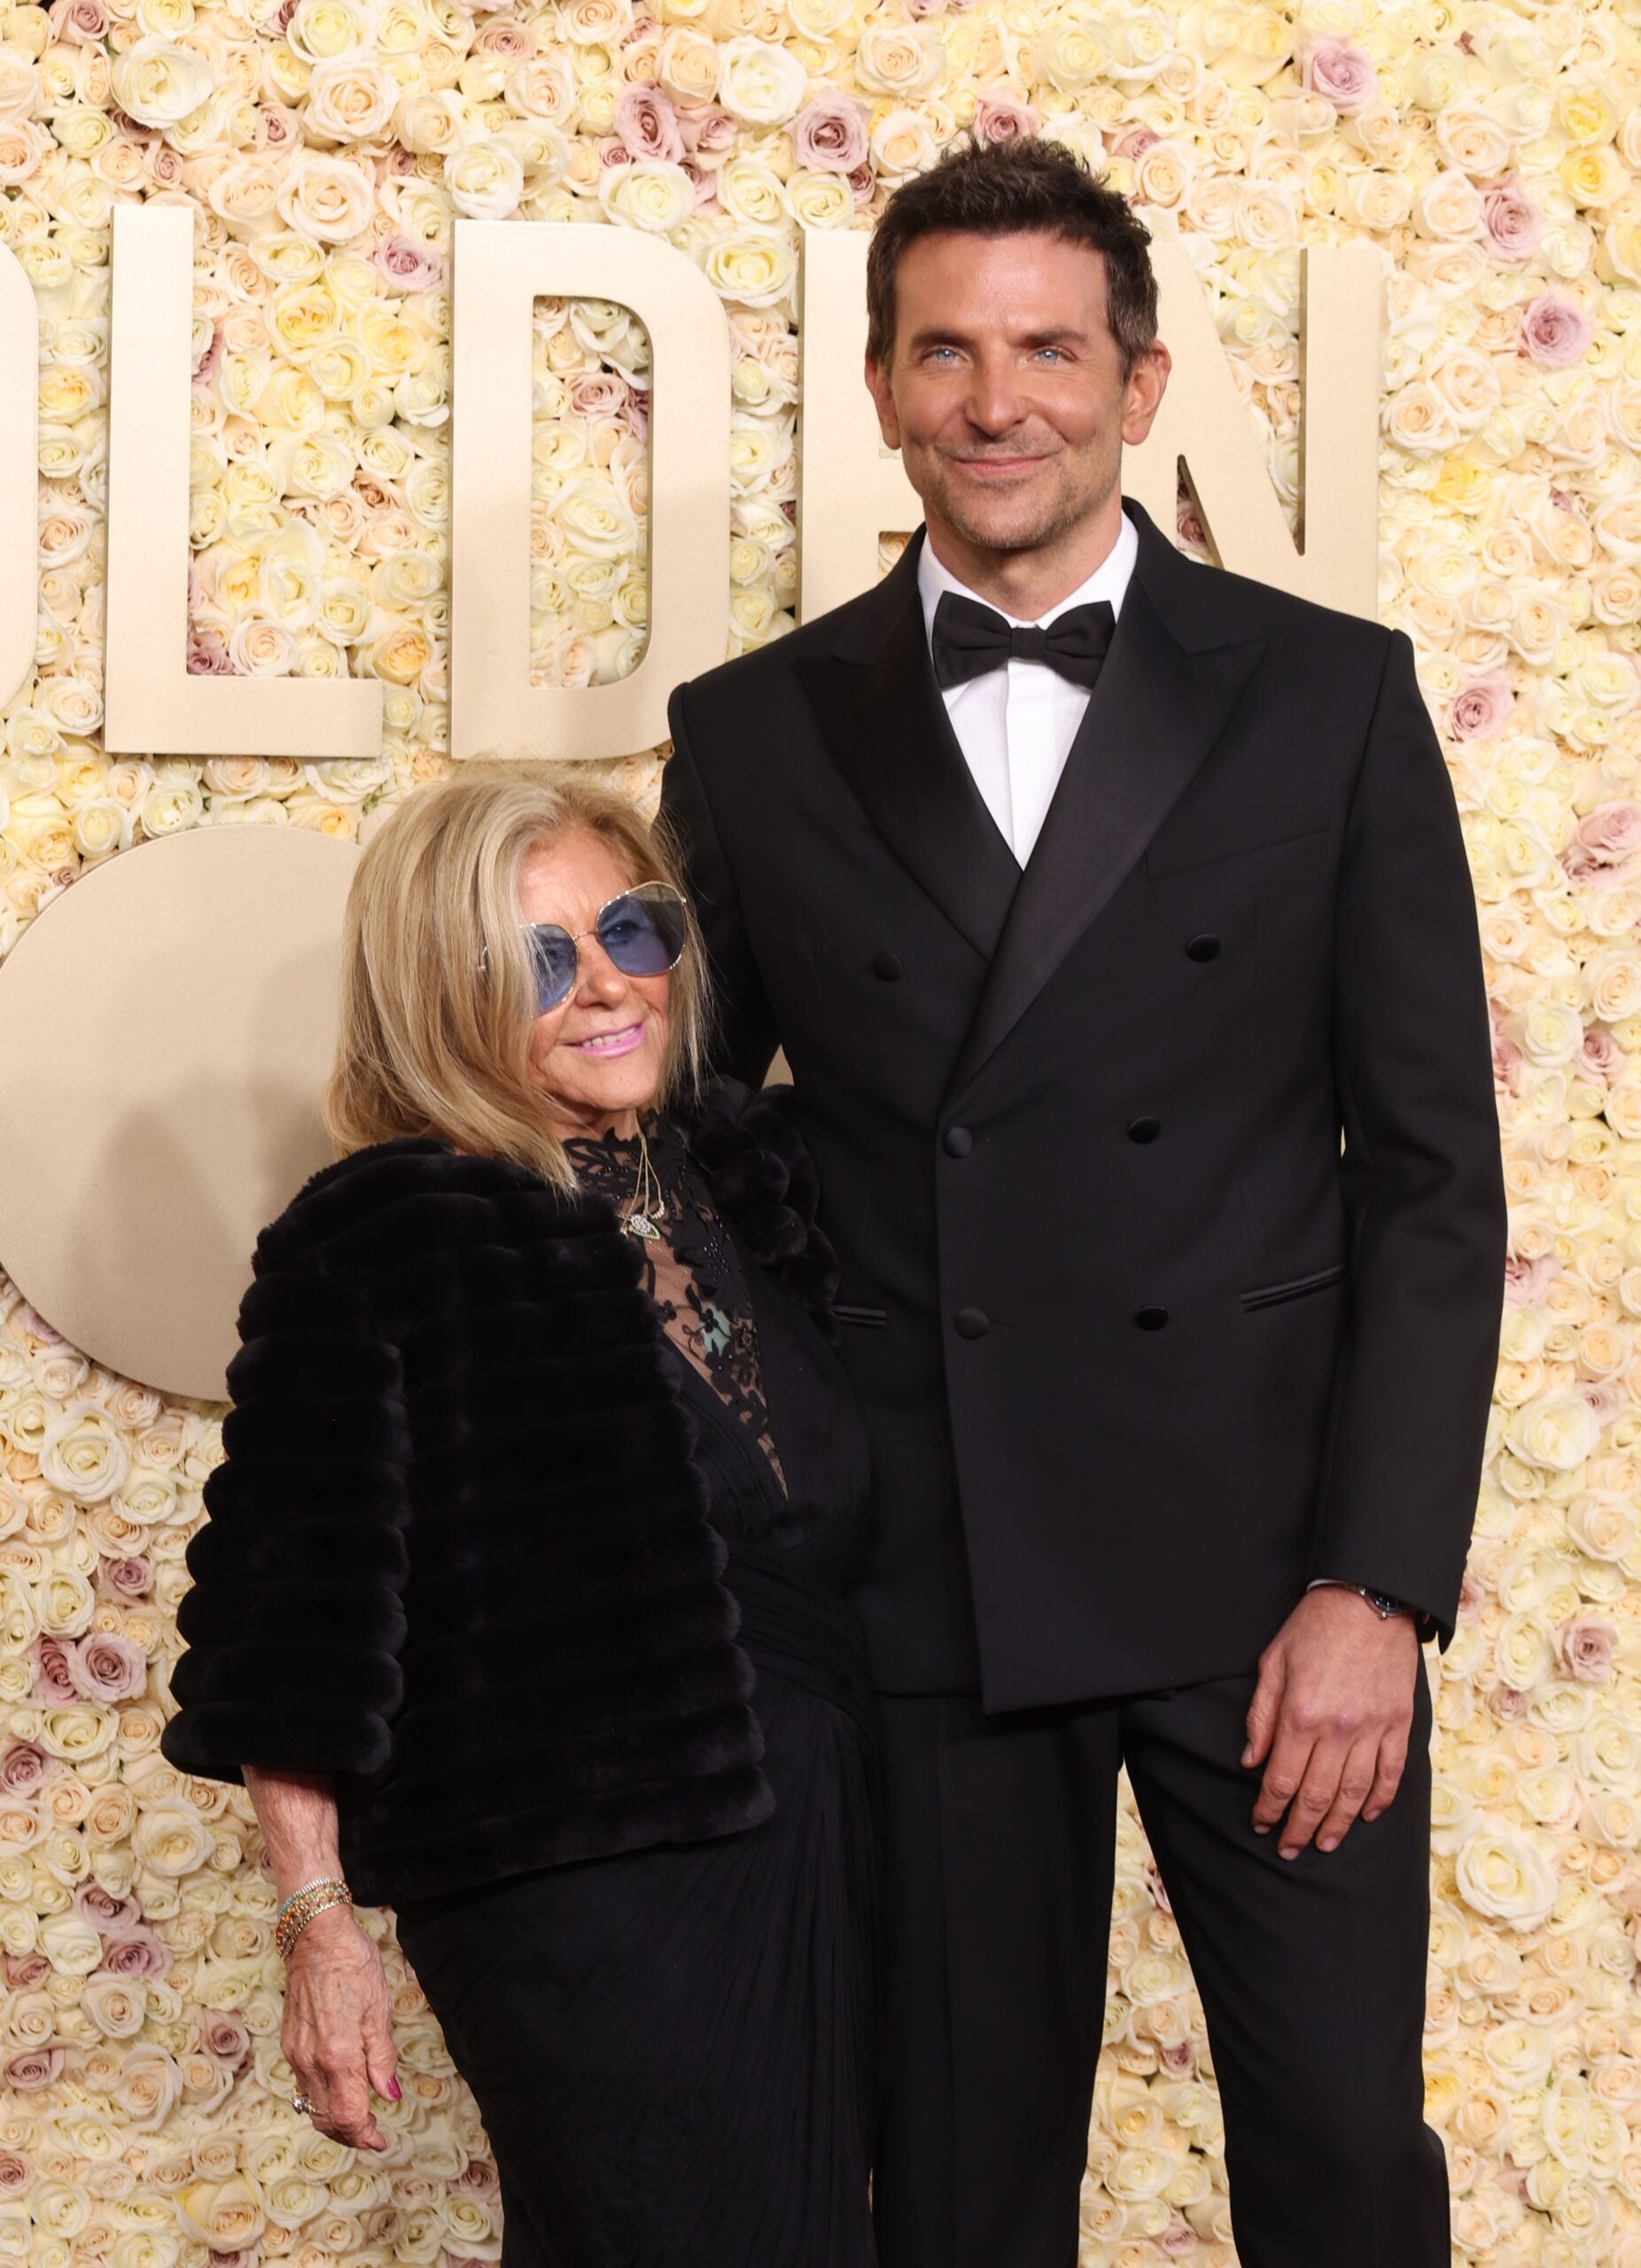 Gloria Campano, left, and Bradley Cooper arrive at the 2024 Golden Globes red carpet.